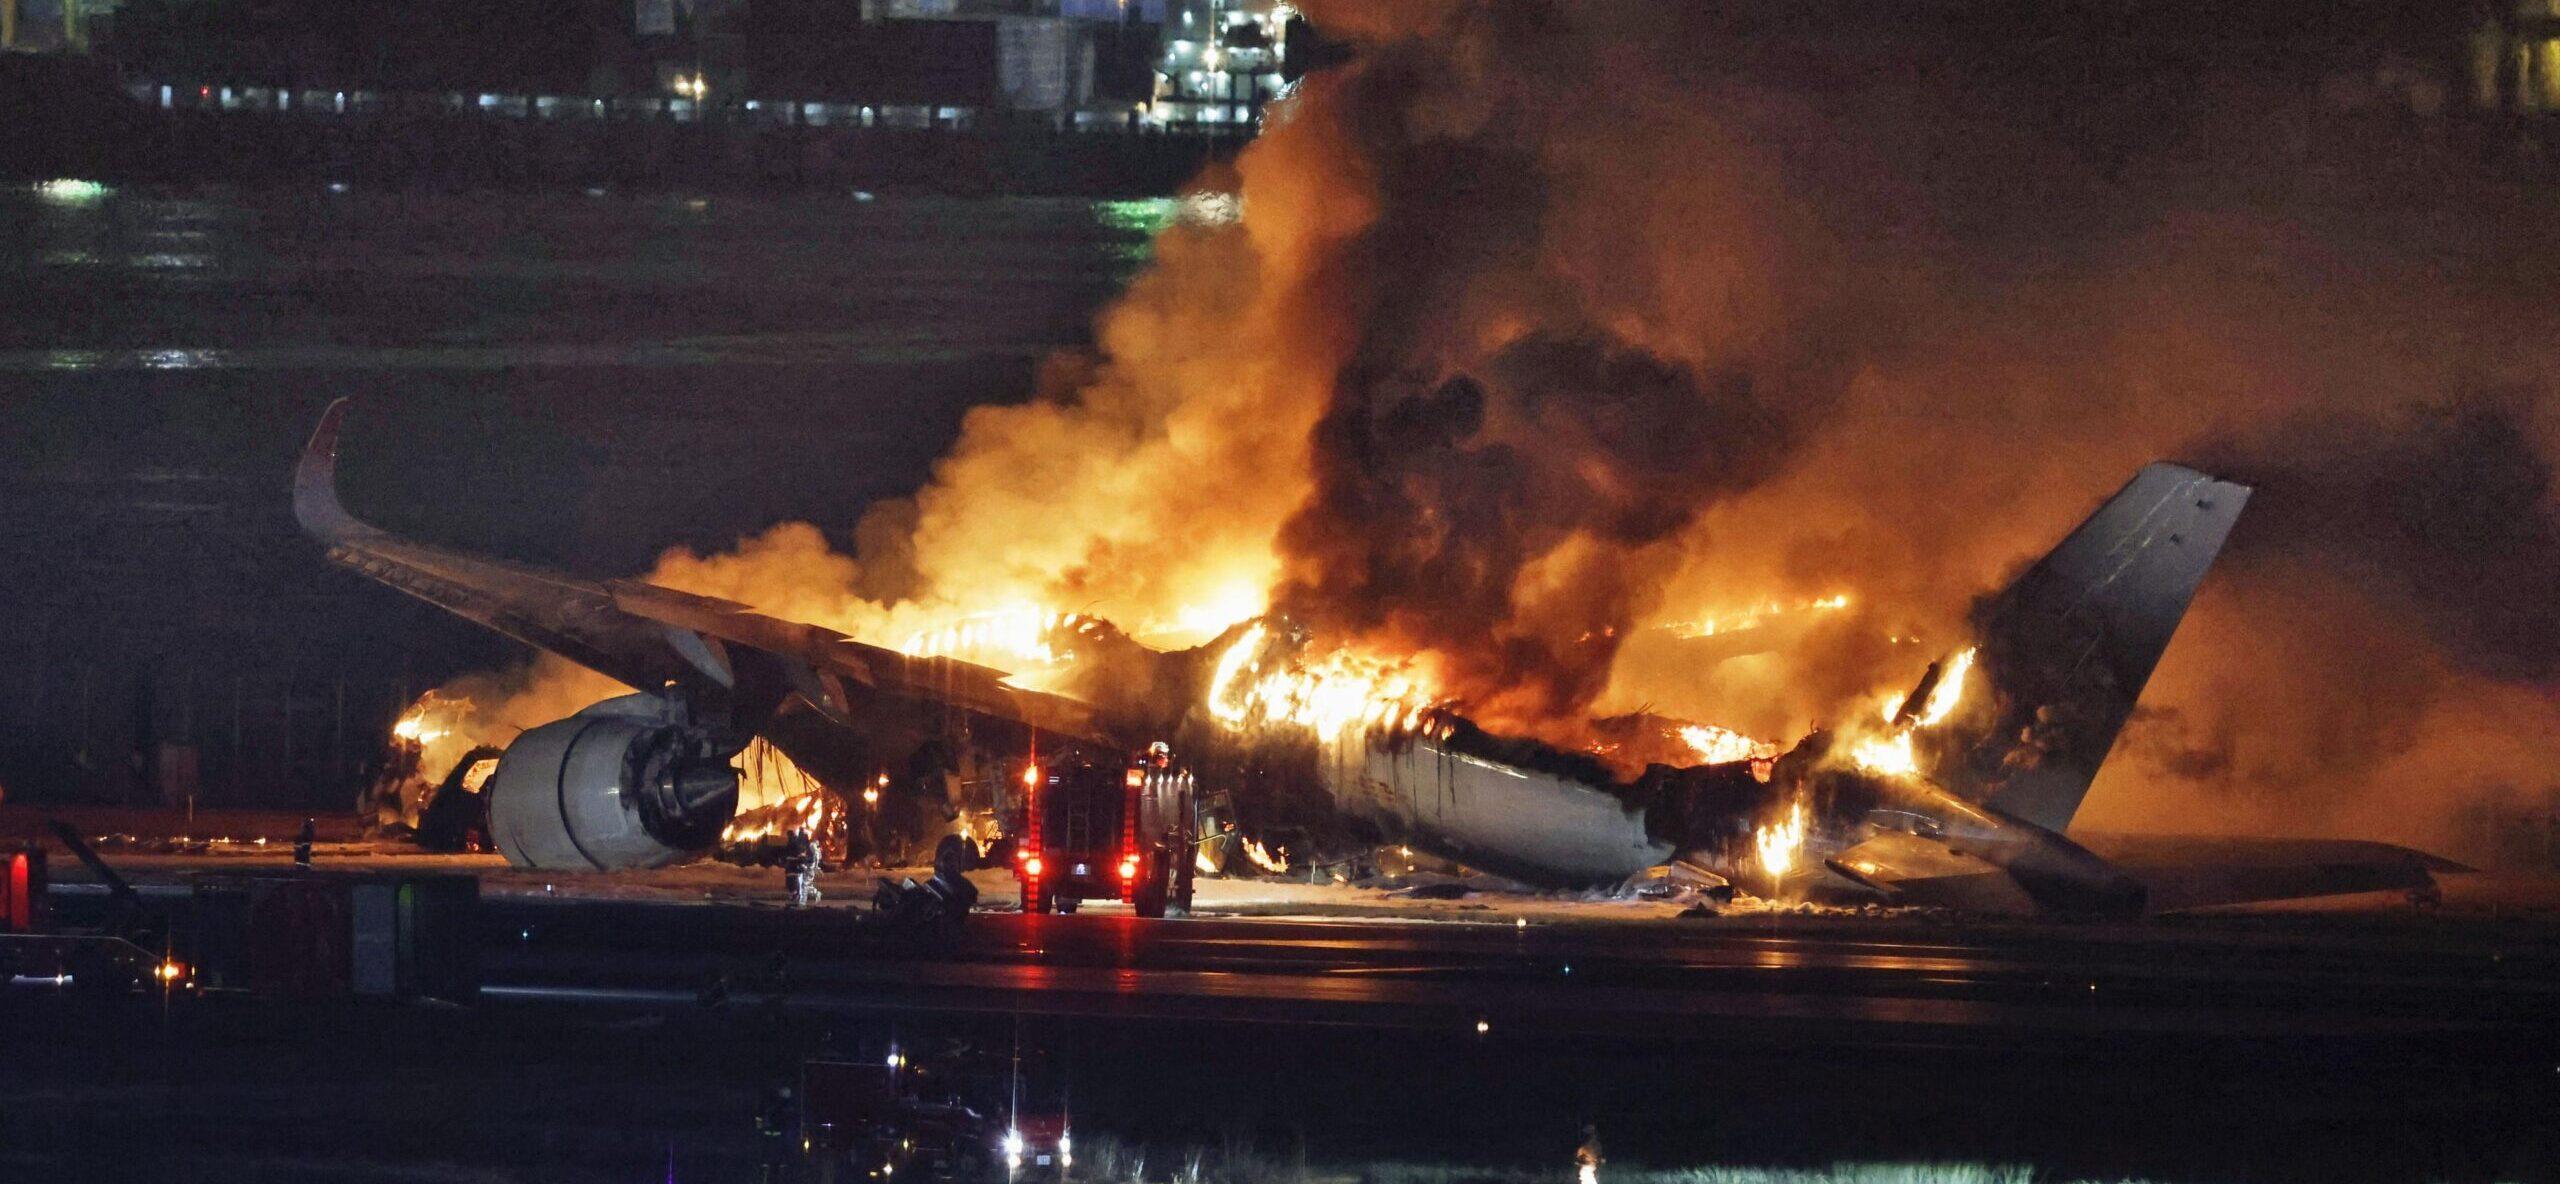 Japan Airlines Plane Involved In Horrific Crash: Video Footage Released